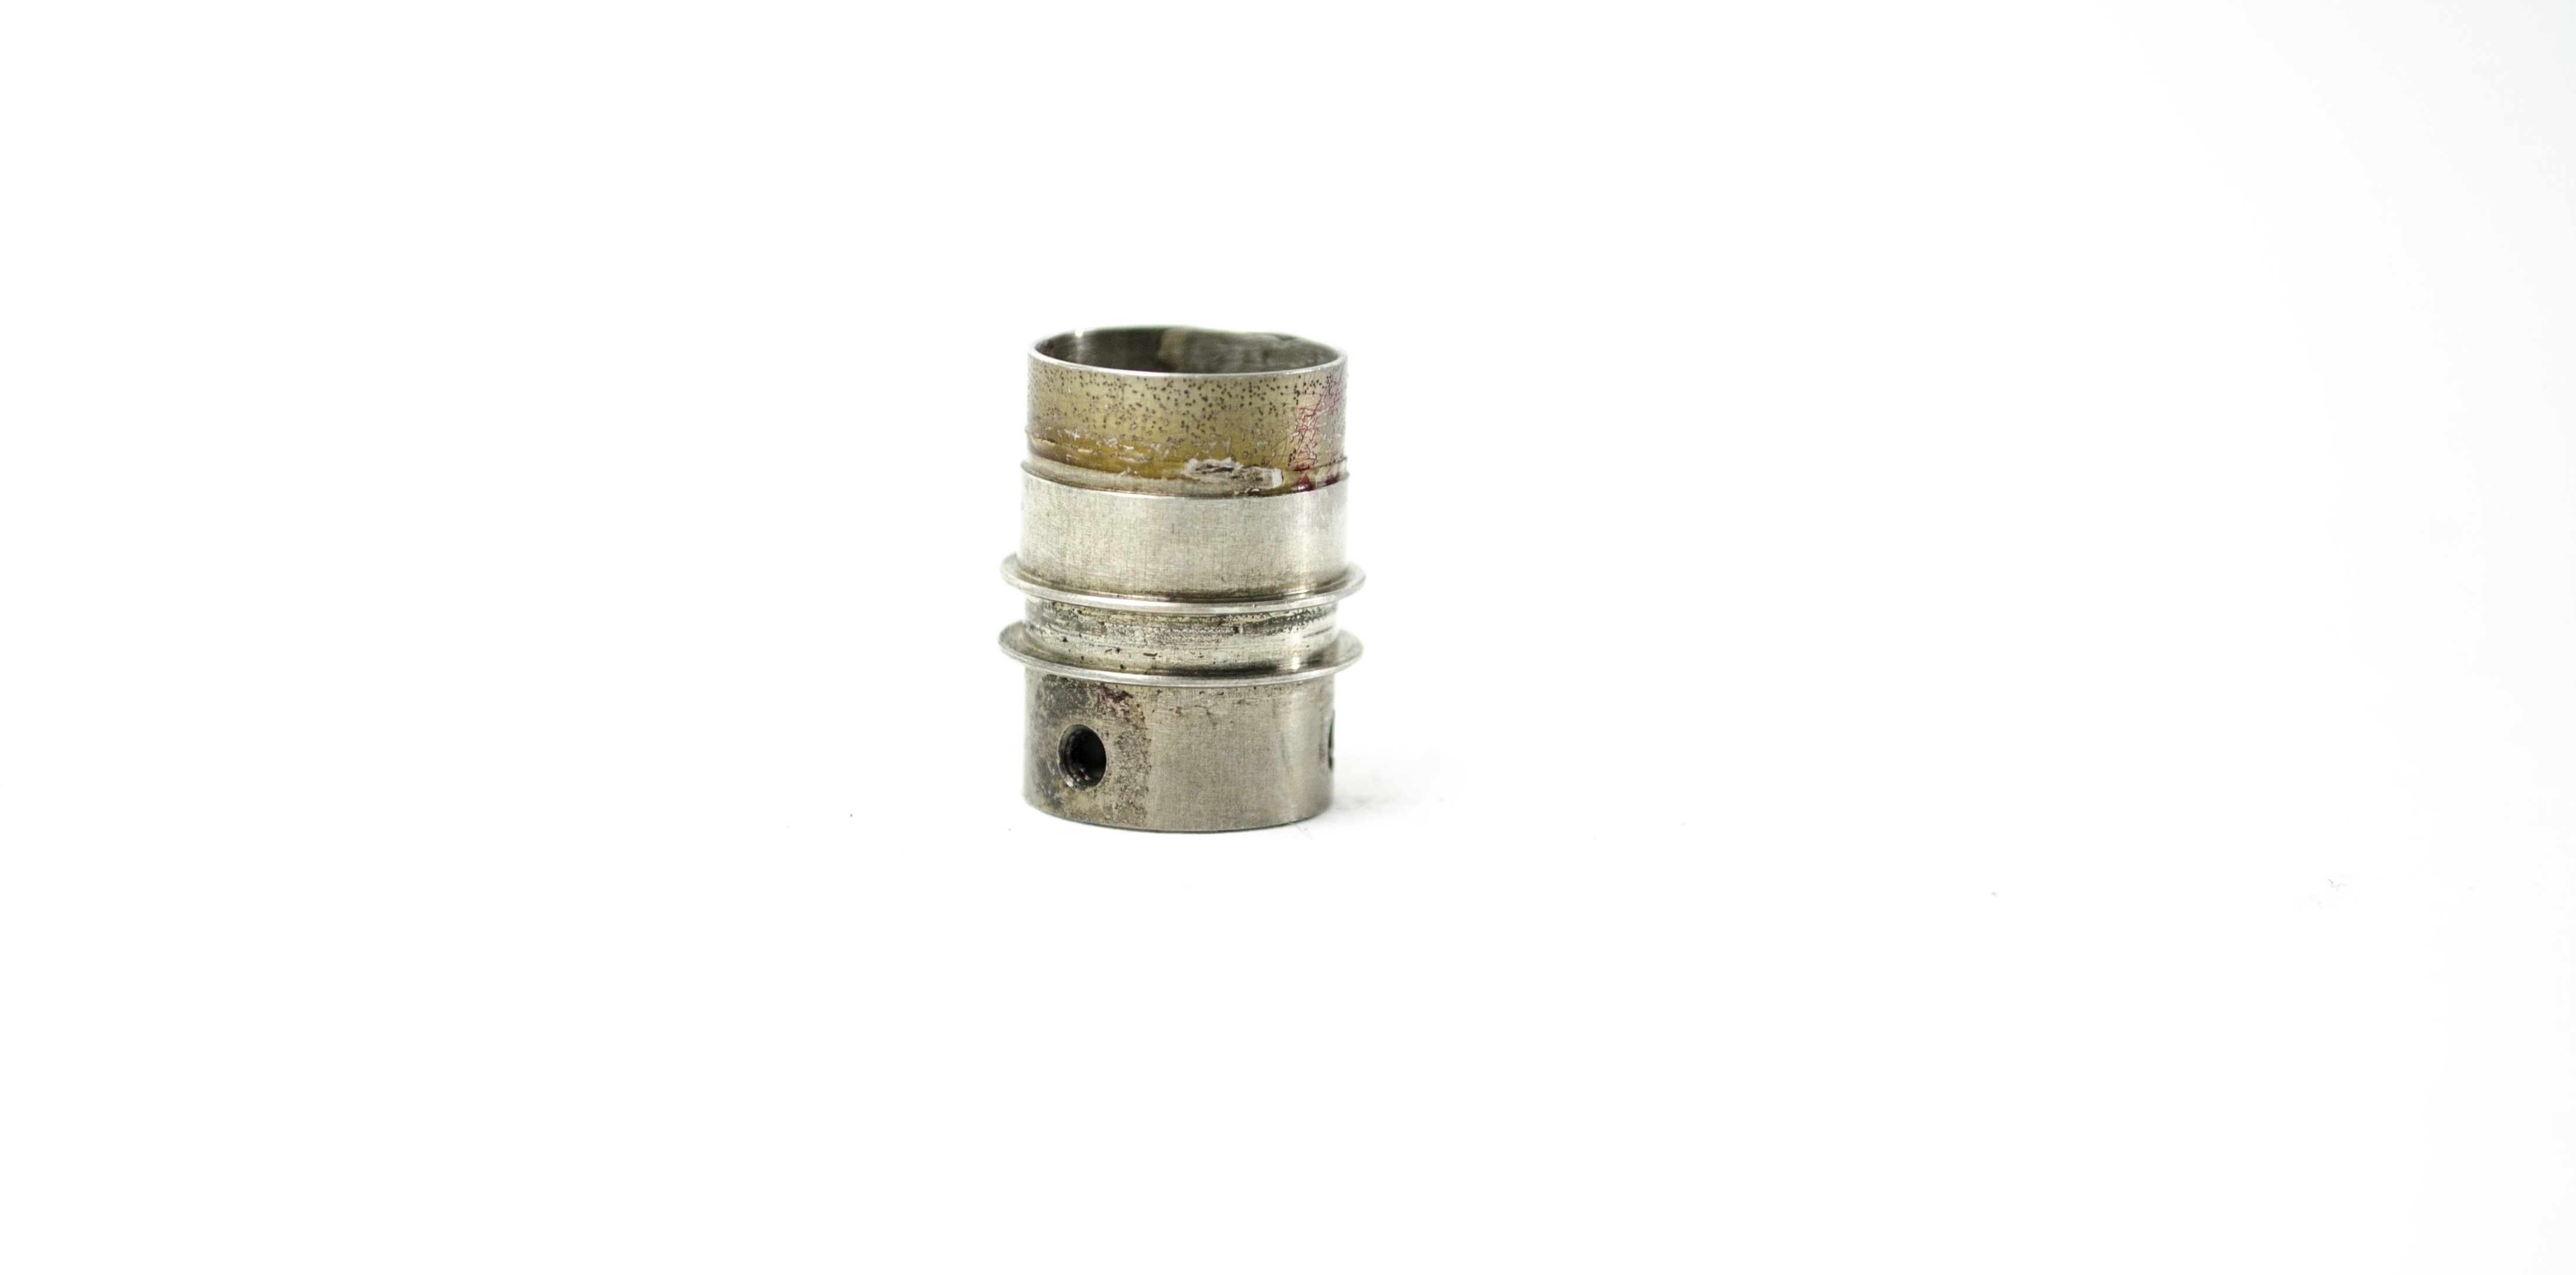 OEM Insertion Tube Proximal End Fitting - GIF-Q145